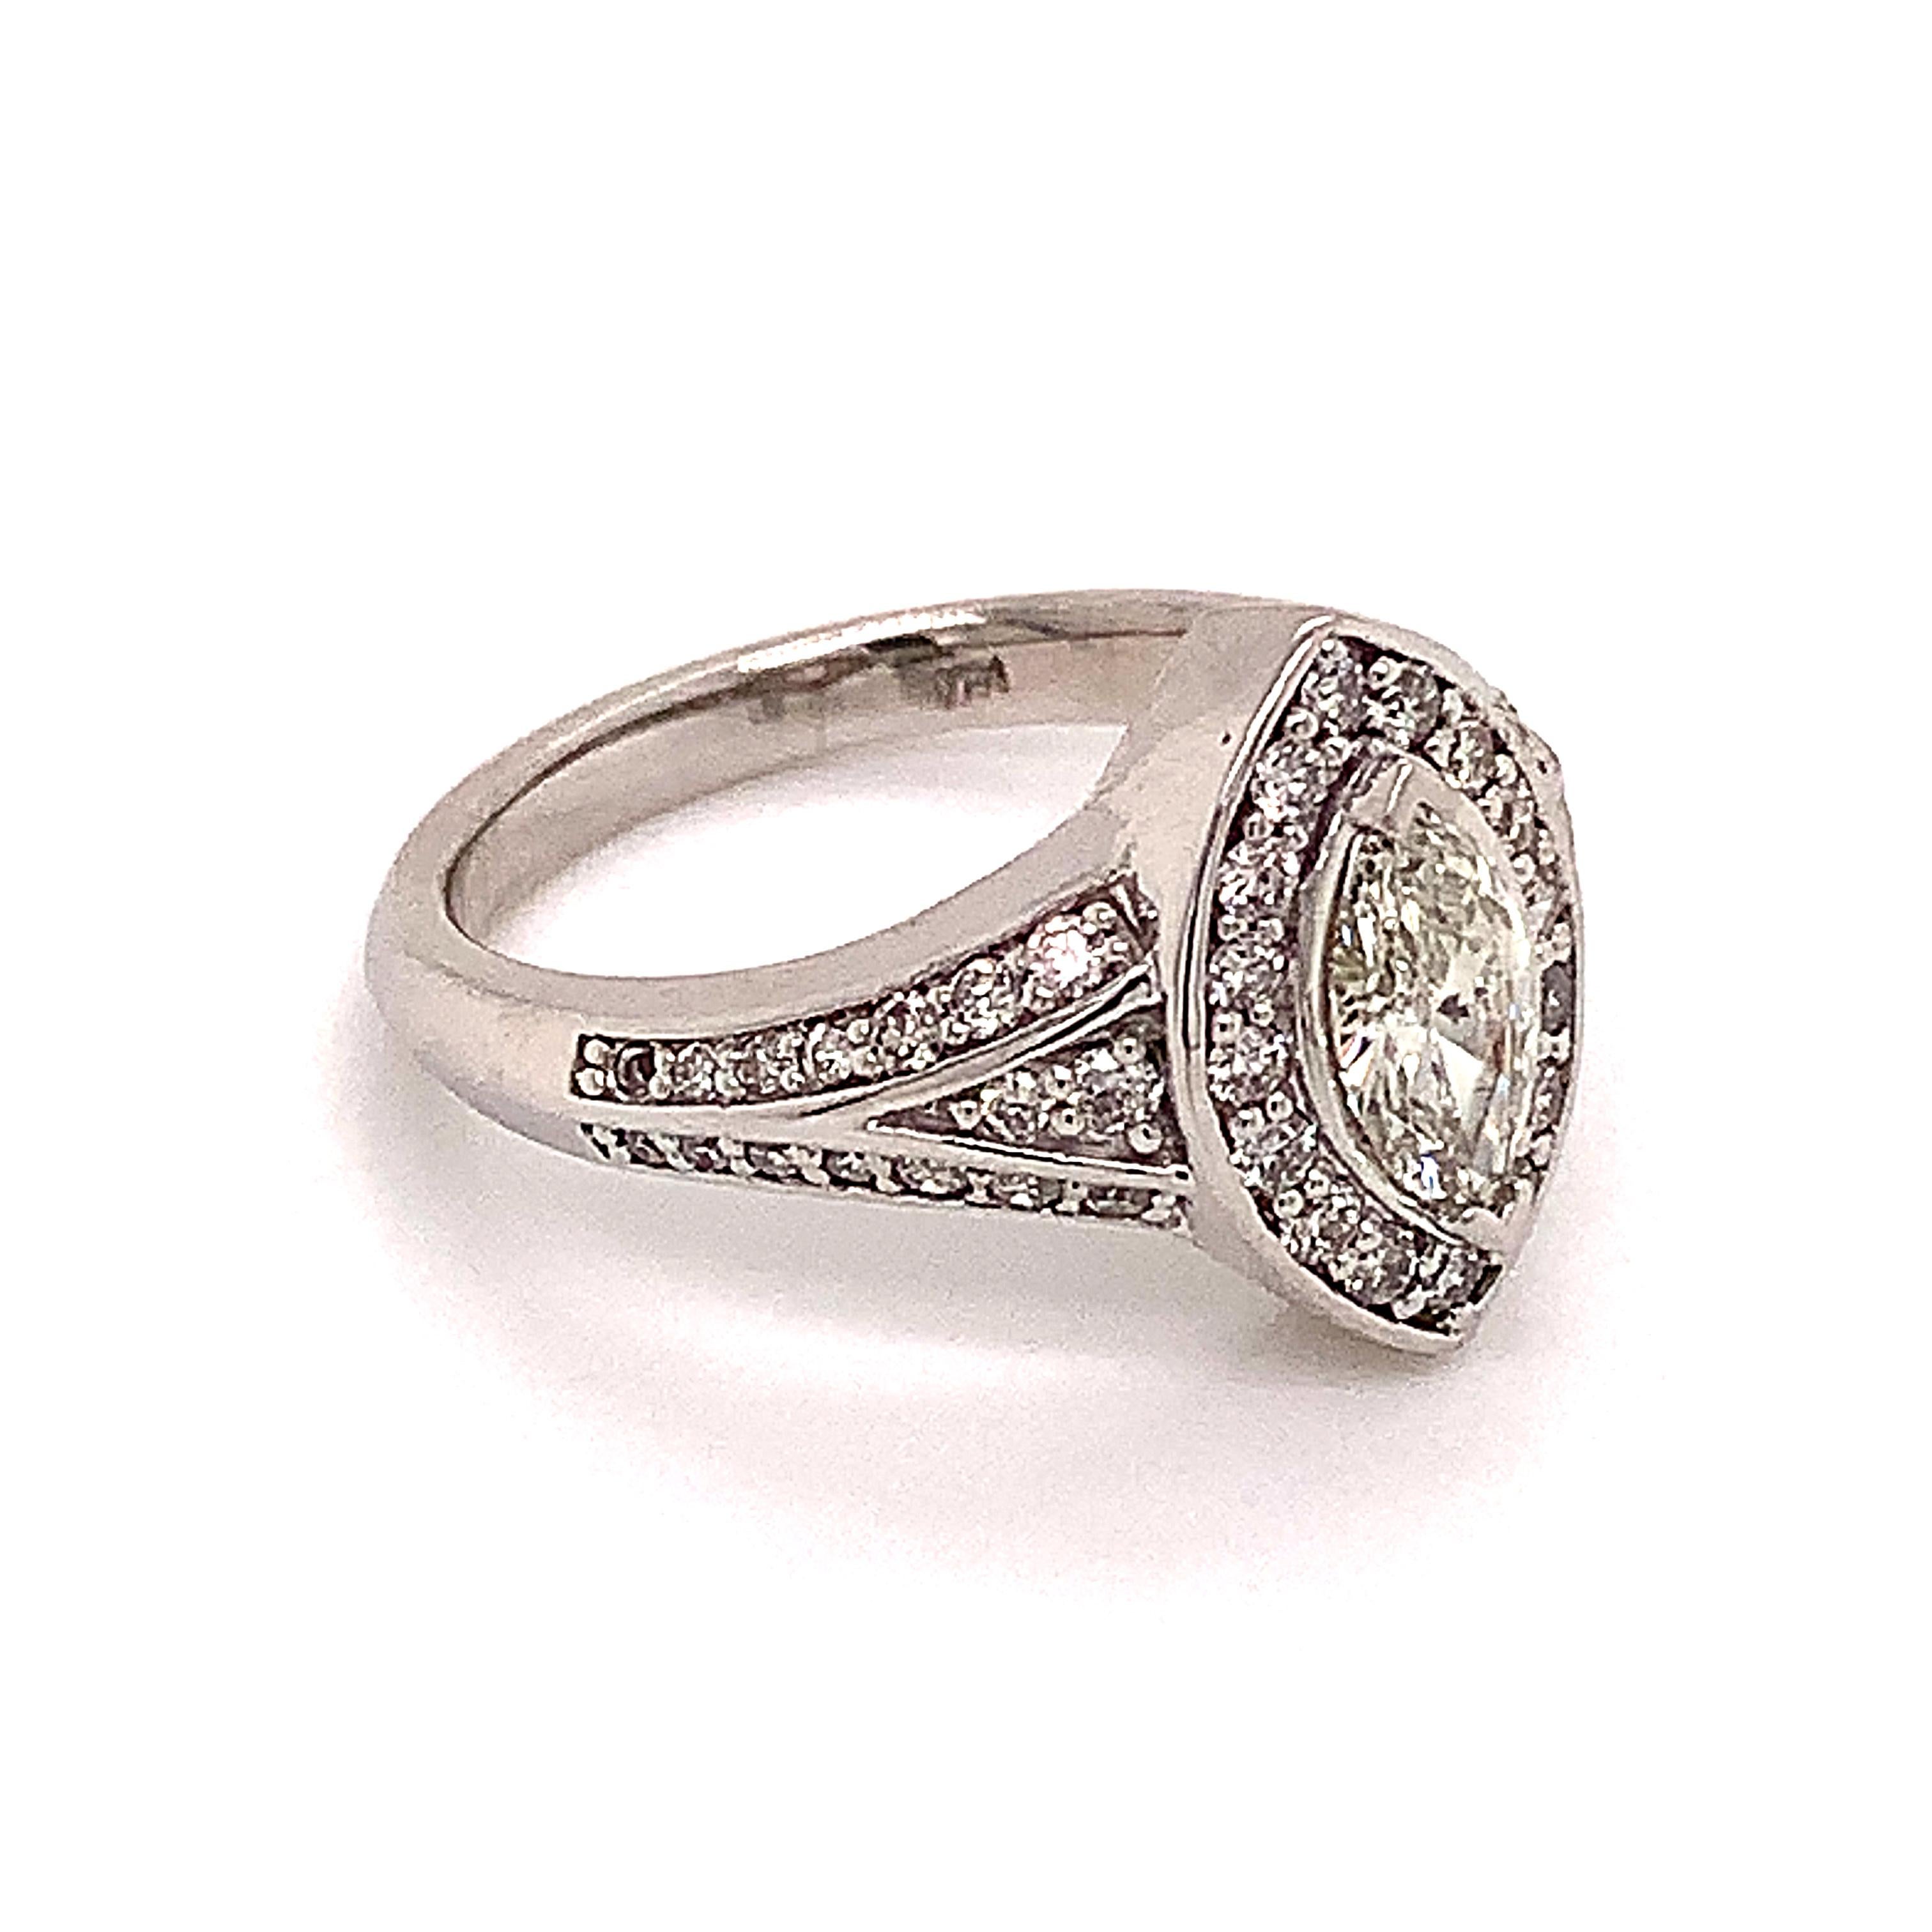 Diamond Ring 14k White Gold 0.45 TCW 4.88g Certified For Sale 3